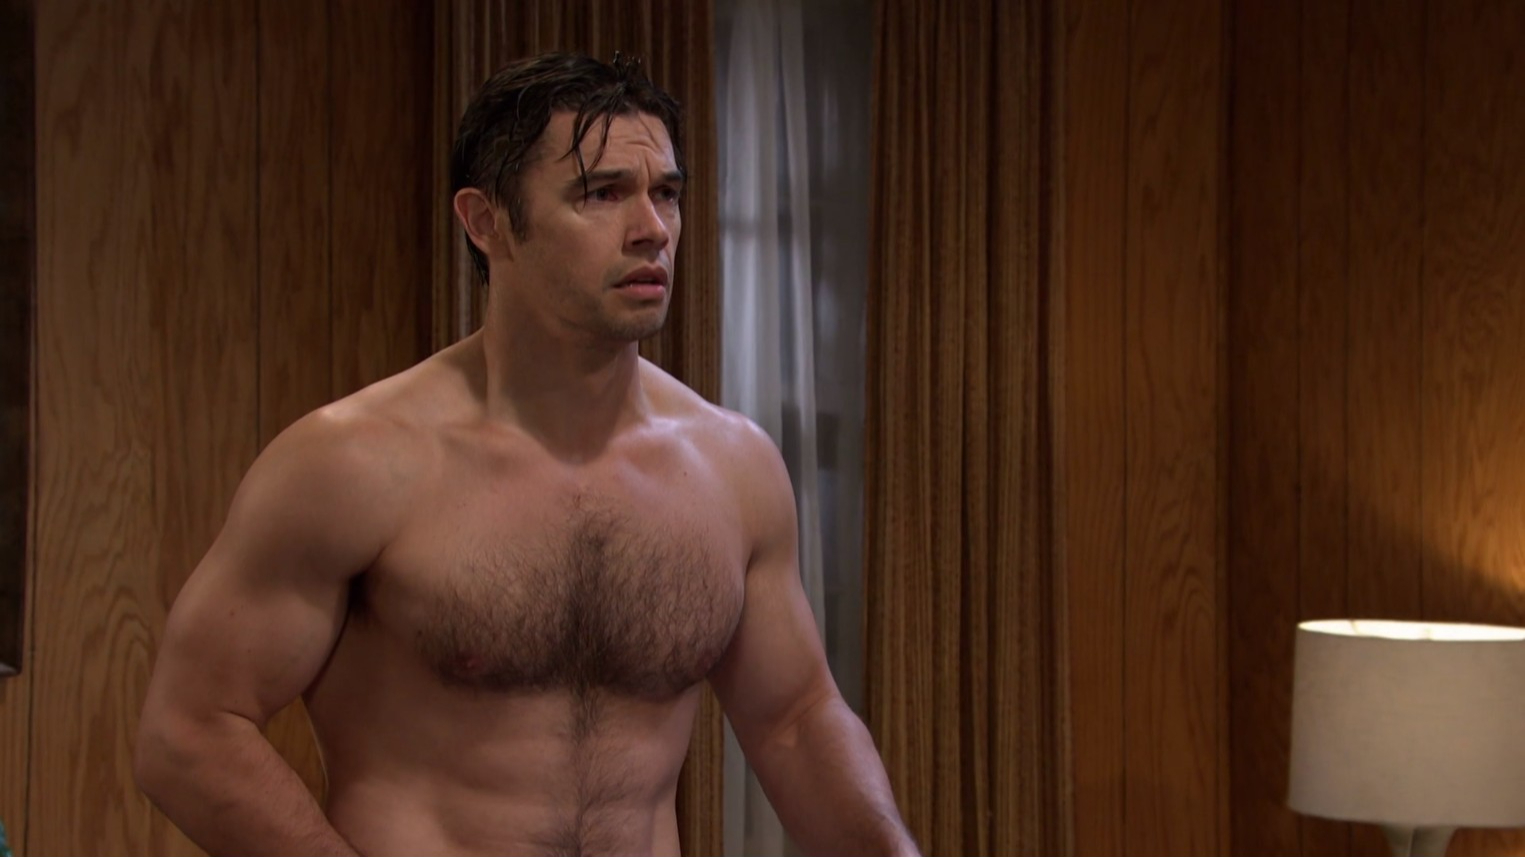 xander shirtless shocked sarah there. Days recaps soapsspoilers